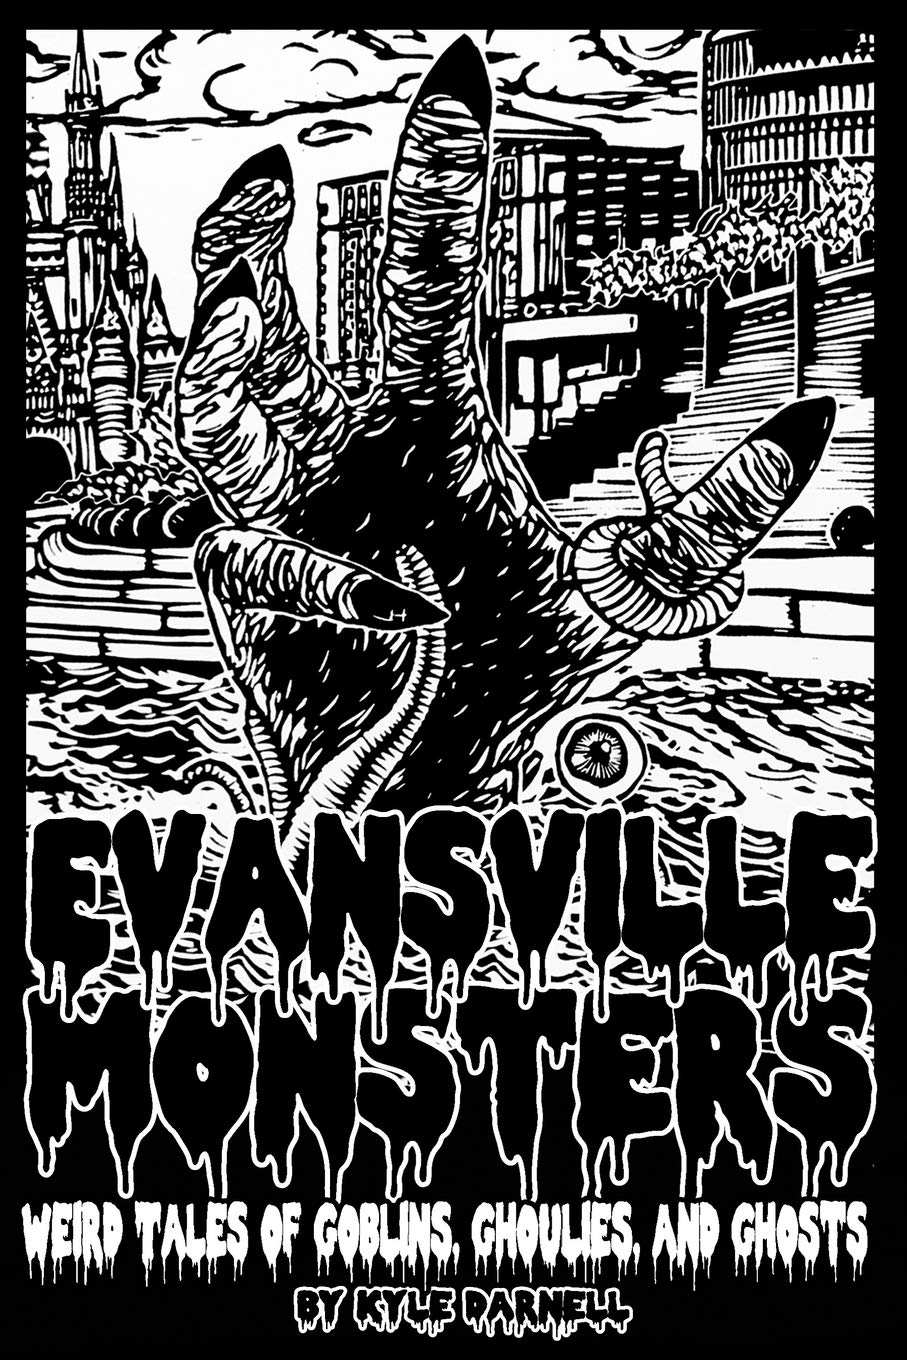 Evansville Monsters: Weird Tales of Goblins, Ghoulies, and Ghosts